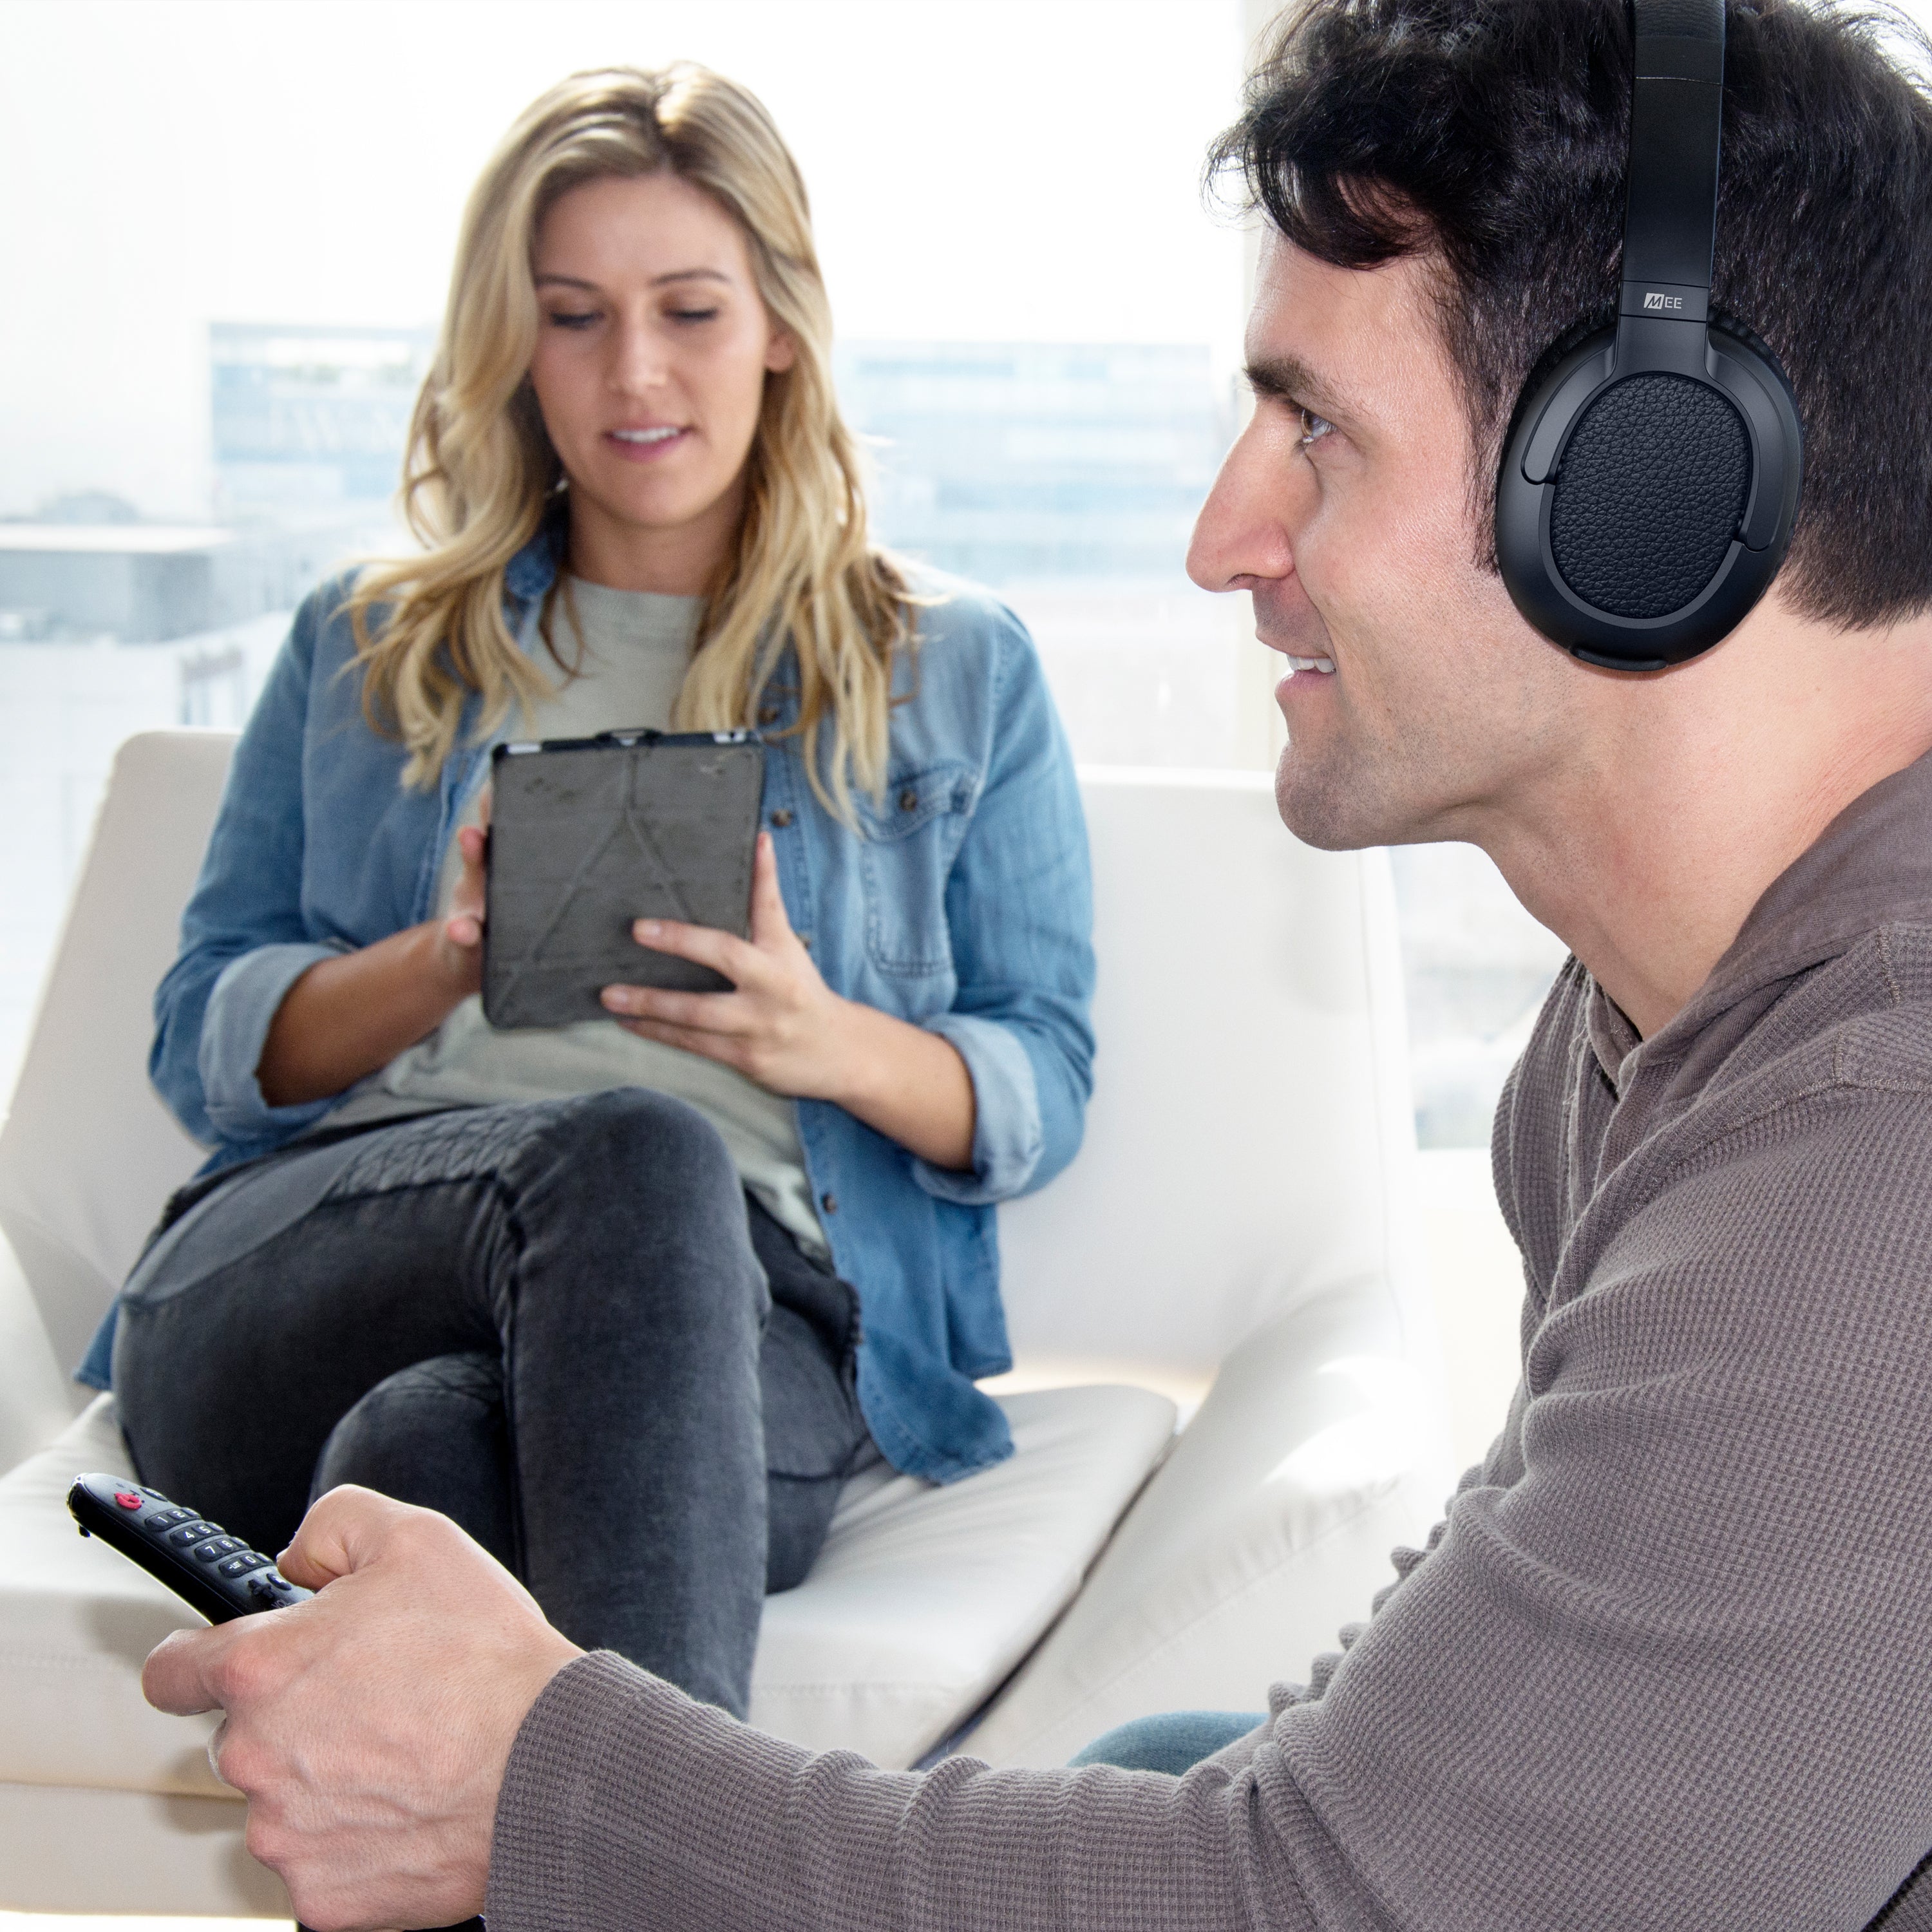 A man wearing headphones holds a remote, looking at a woman seated nearby who is focused on a tablet, both sitting on a white couch in a brightly lit room.